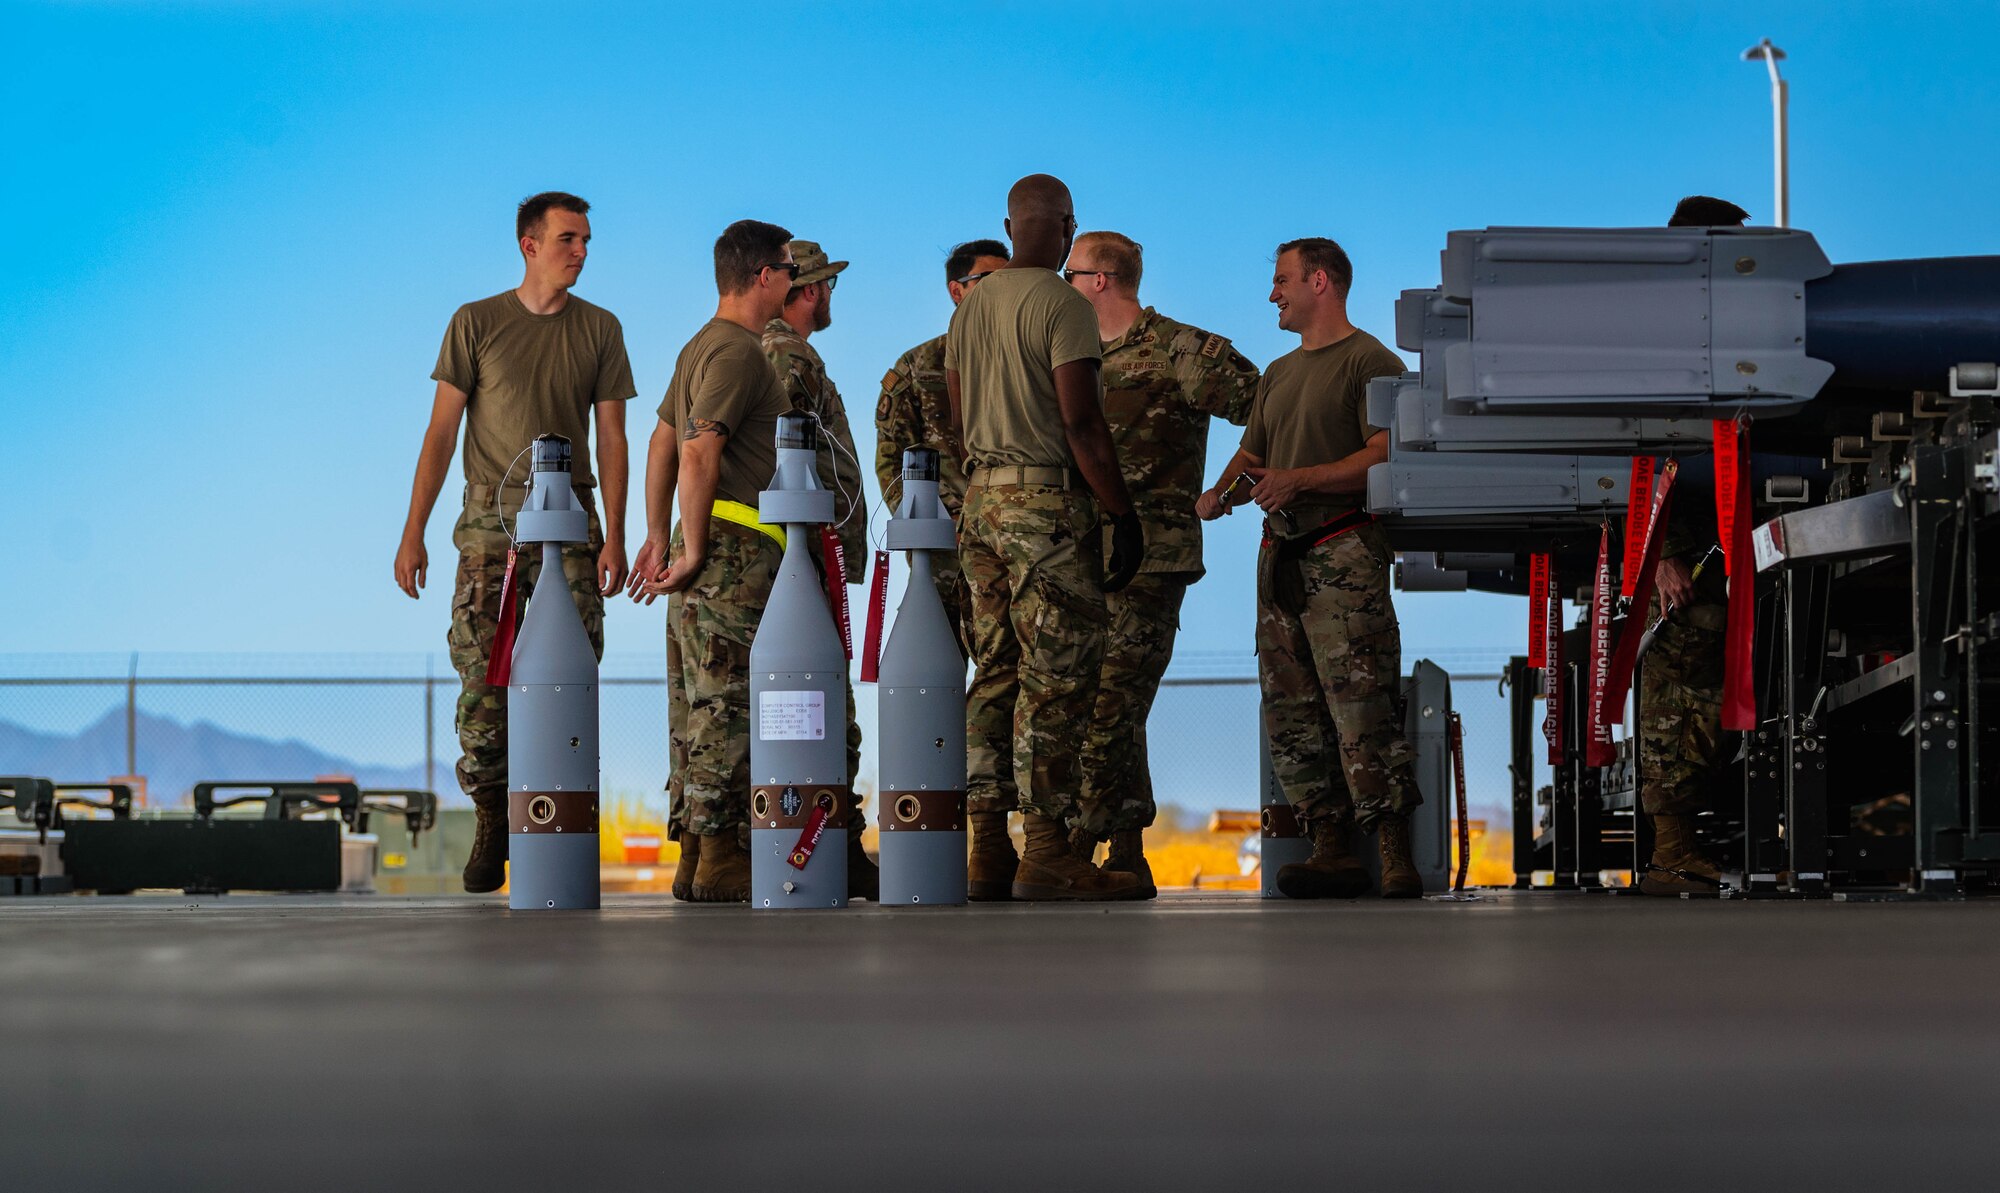 U.S. Air Force Airmen from the 56th Equipment Maintenance Squadron, regroup after a training exercise in preparation for this year’s Air Force Combat Operation Competition.